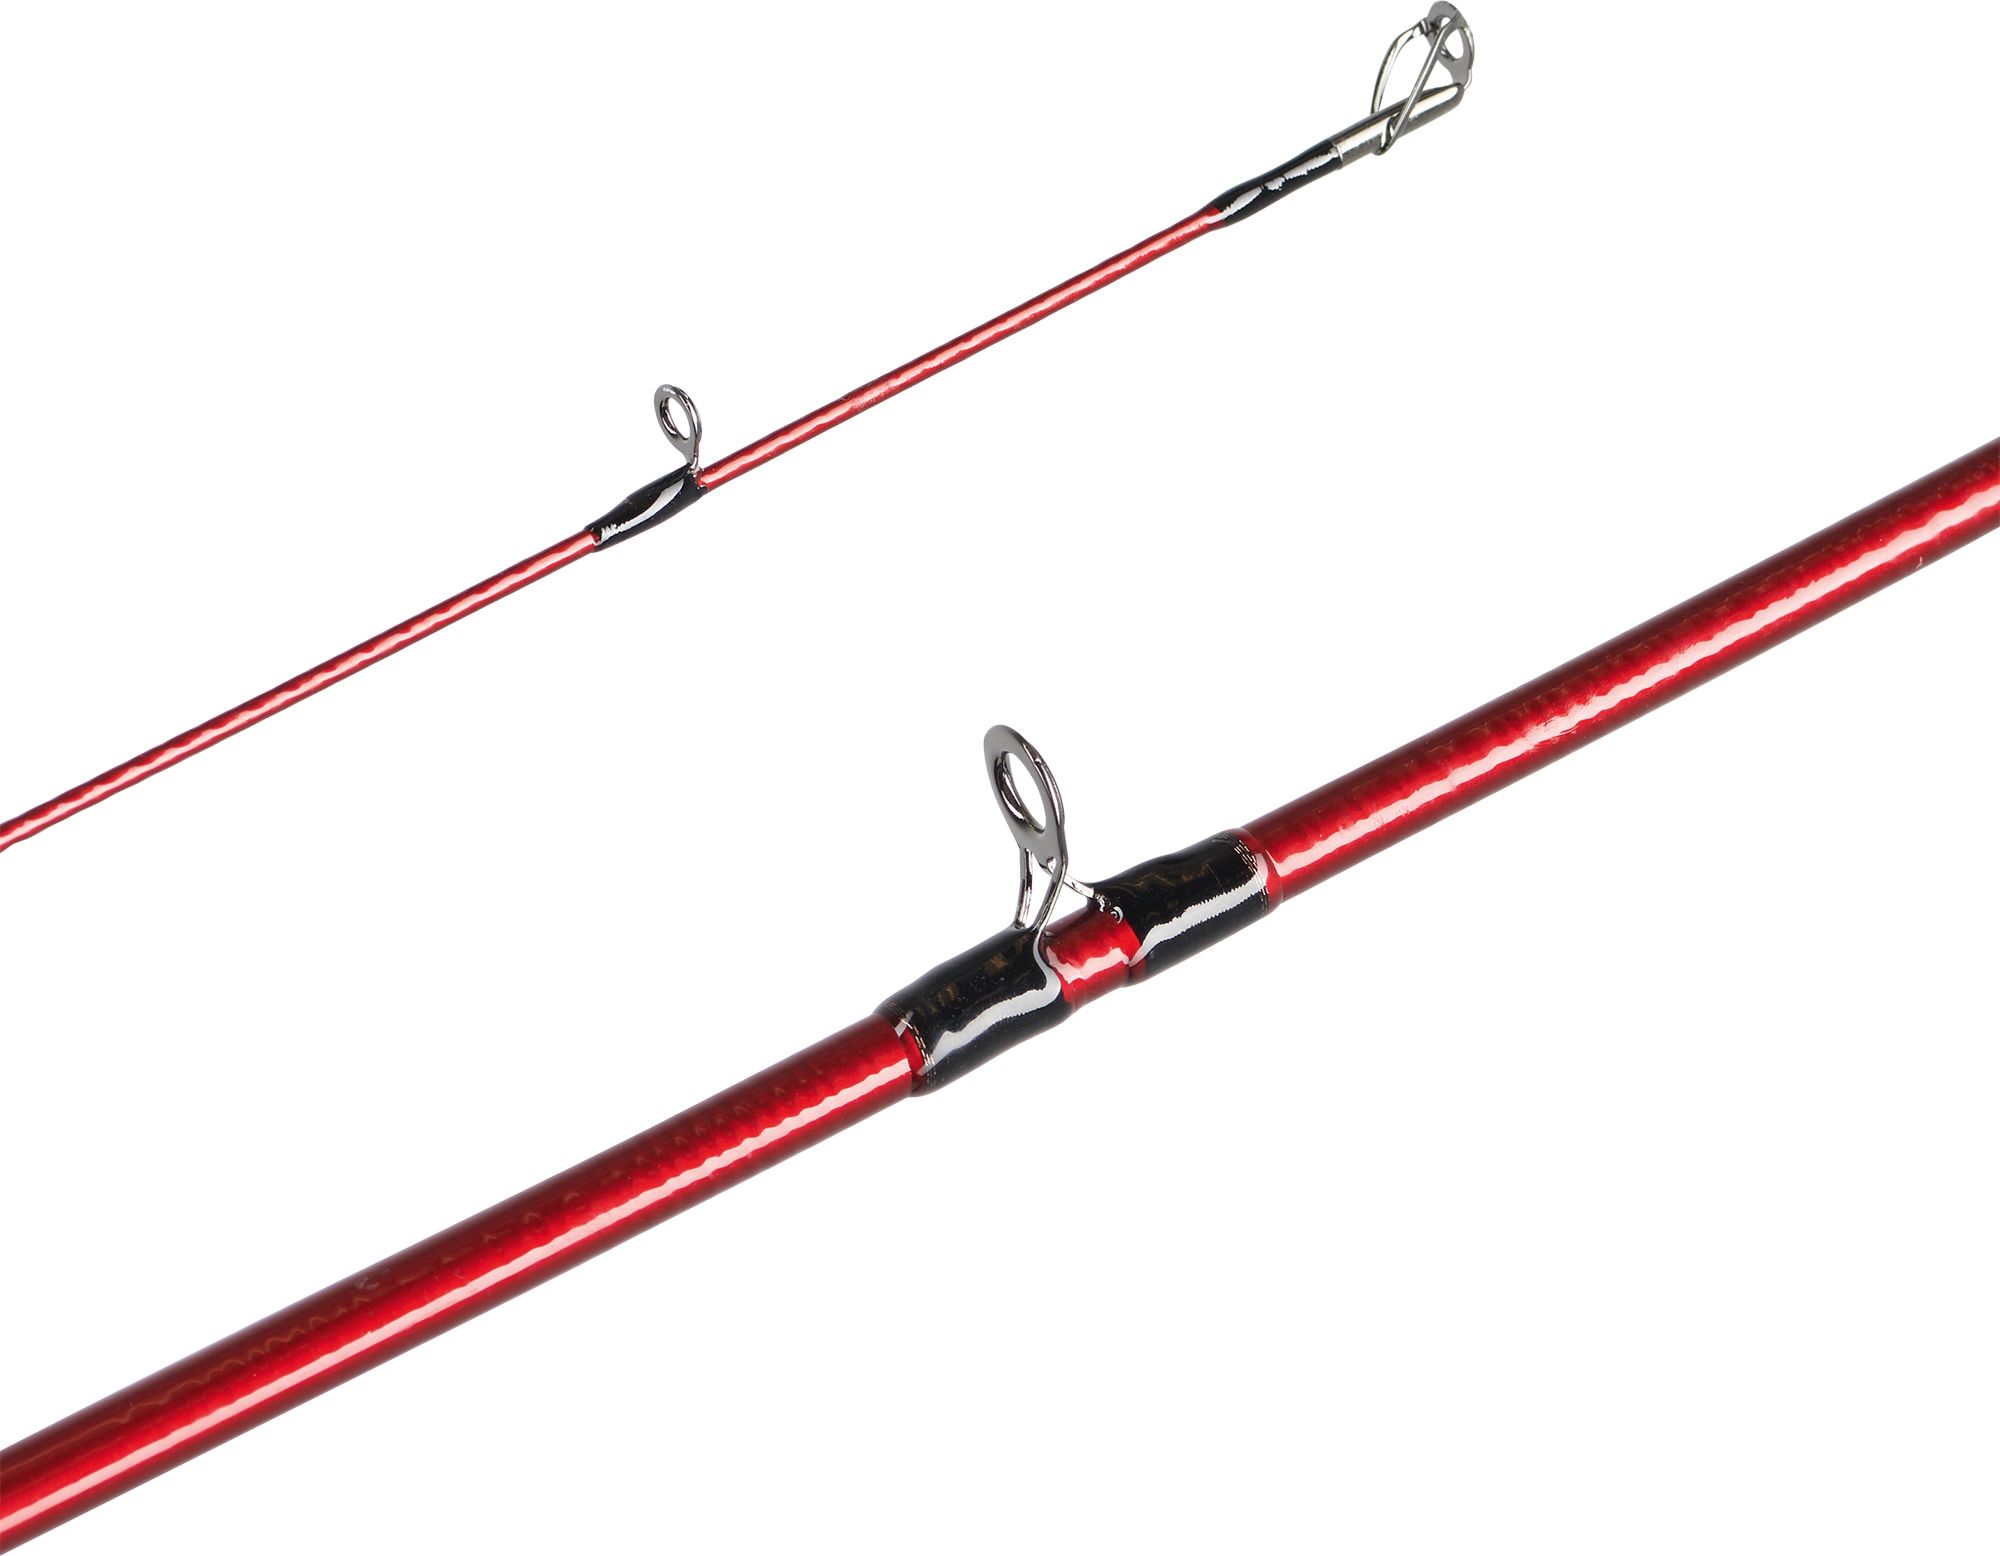 Dick's Sporting Goods Ugly Stick Carbon Casting Rod